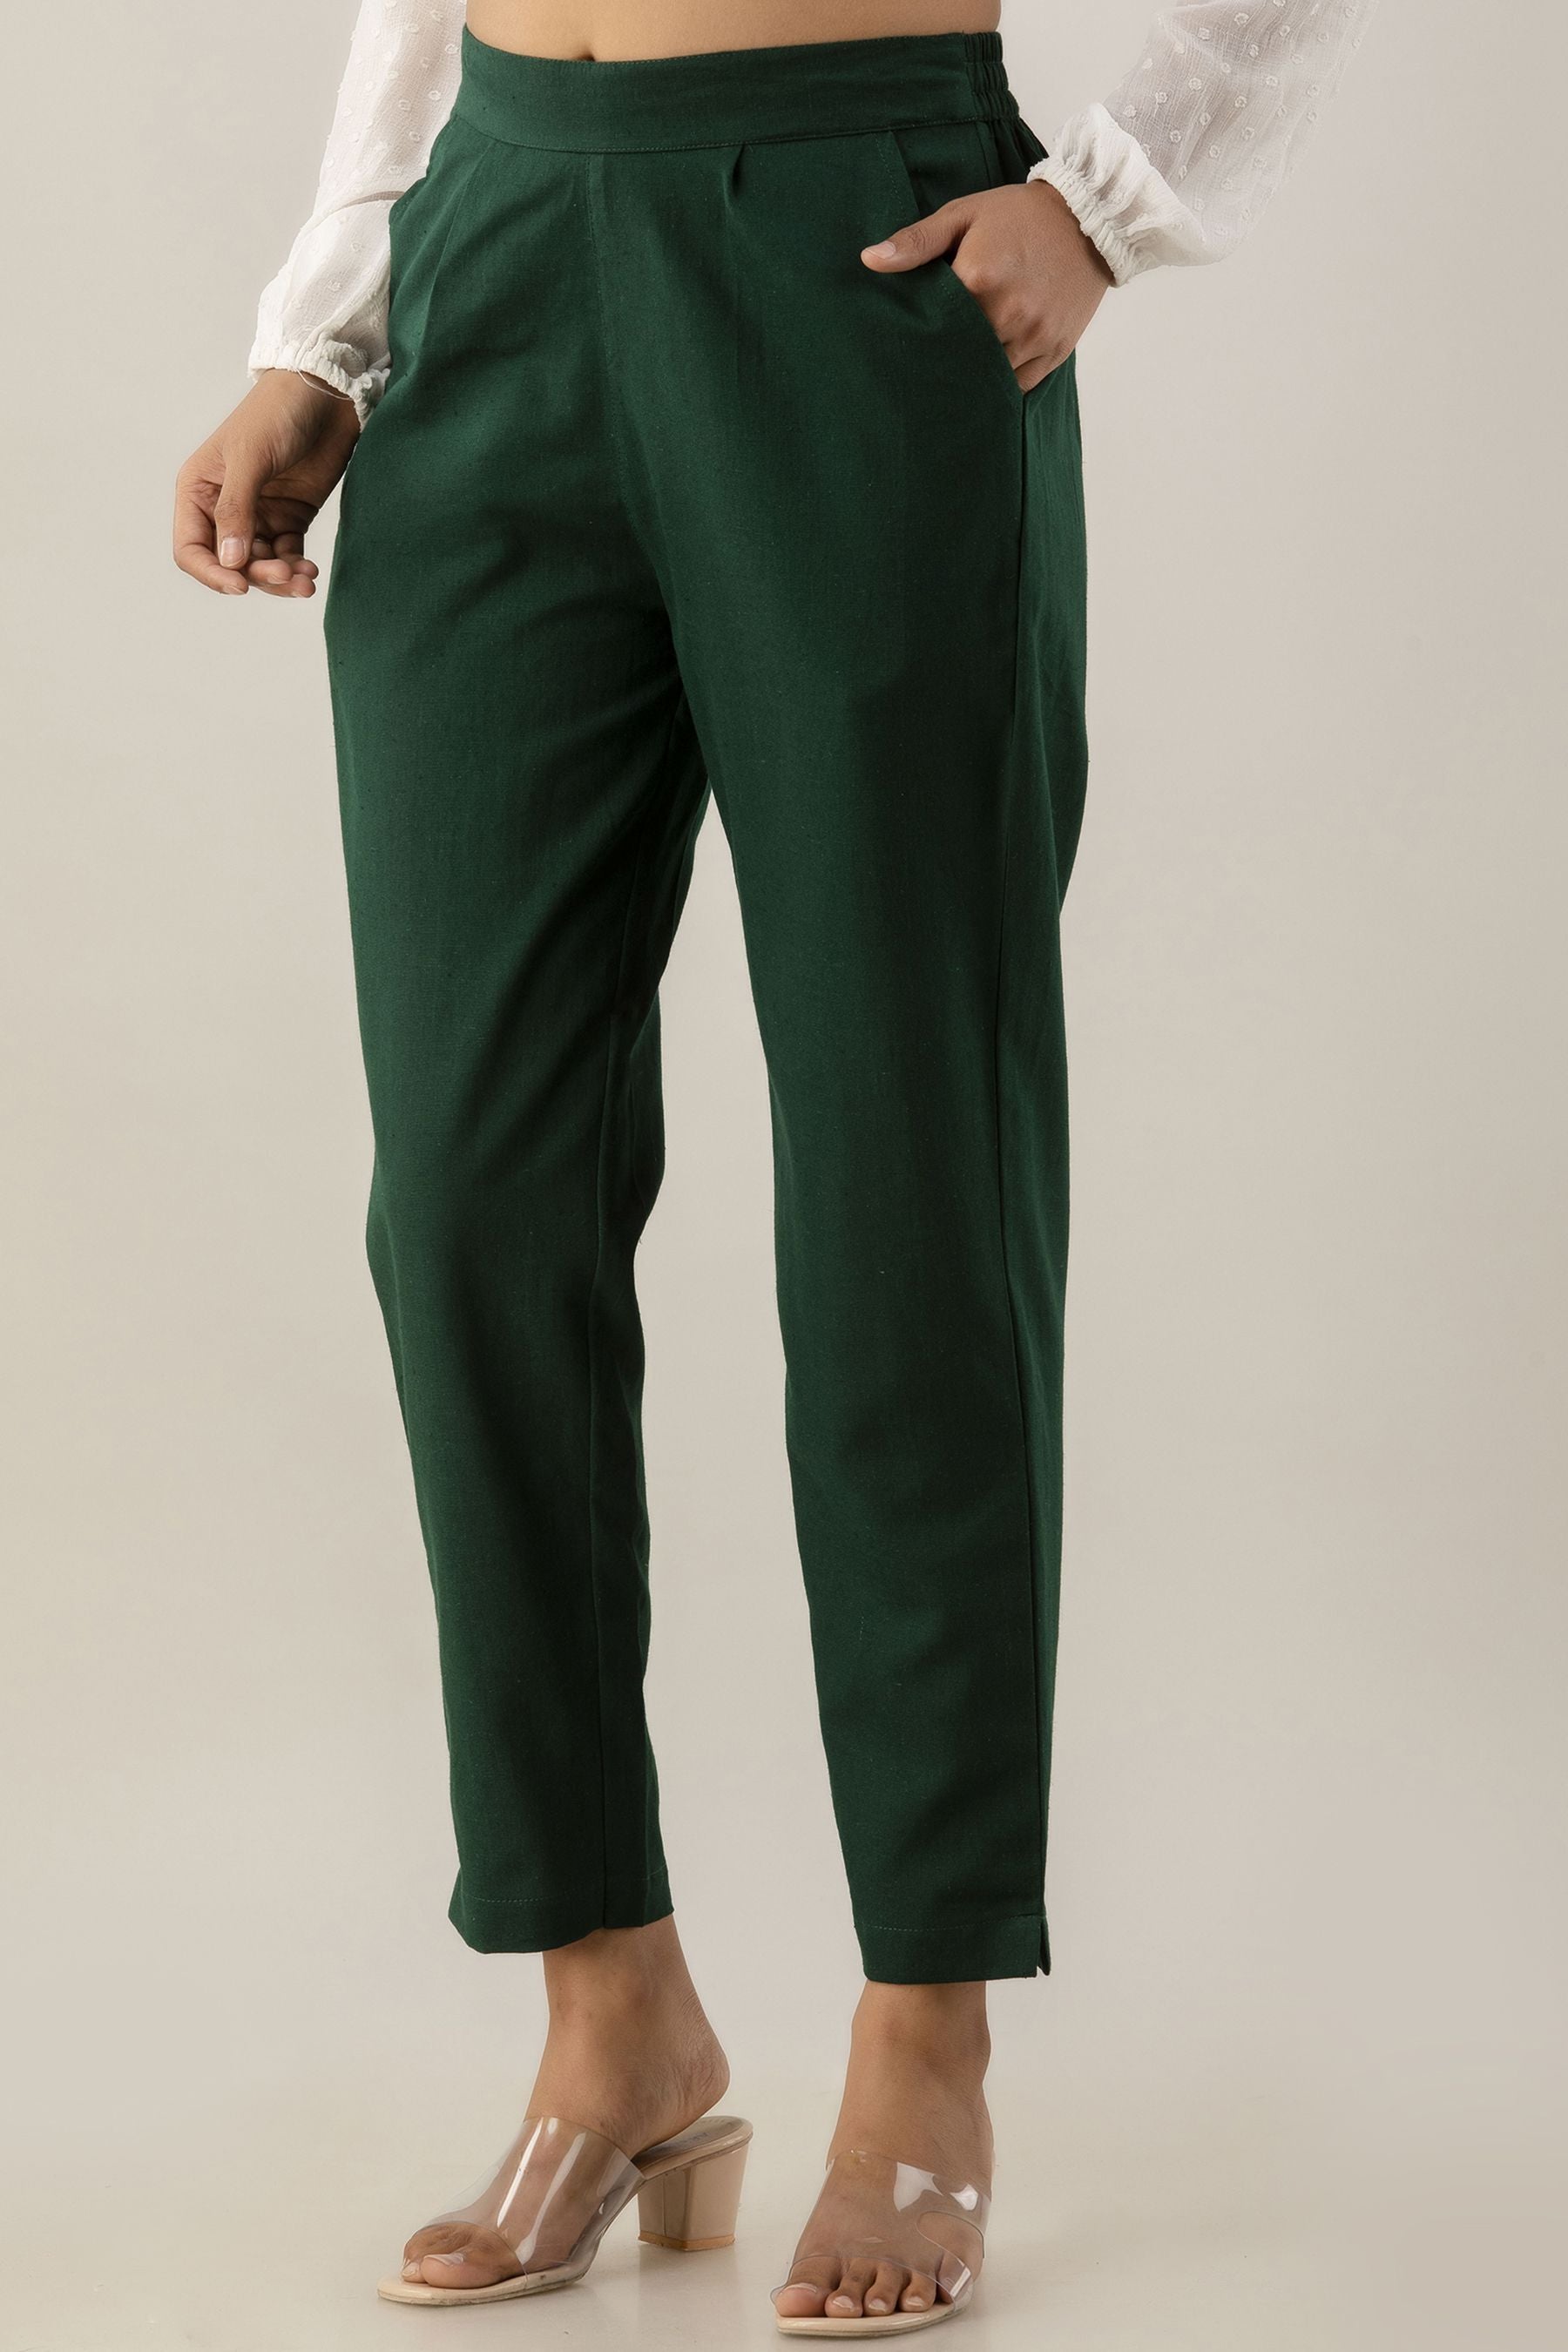 Buy Green Trousers & Pants for Men by UNITED COLORS OF BENETTON Online |  Ajio.com